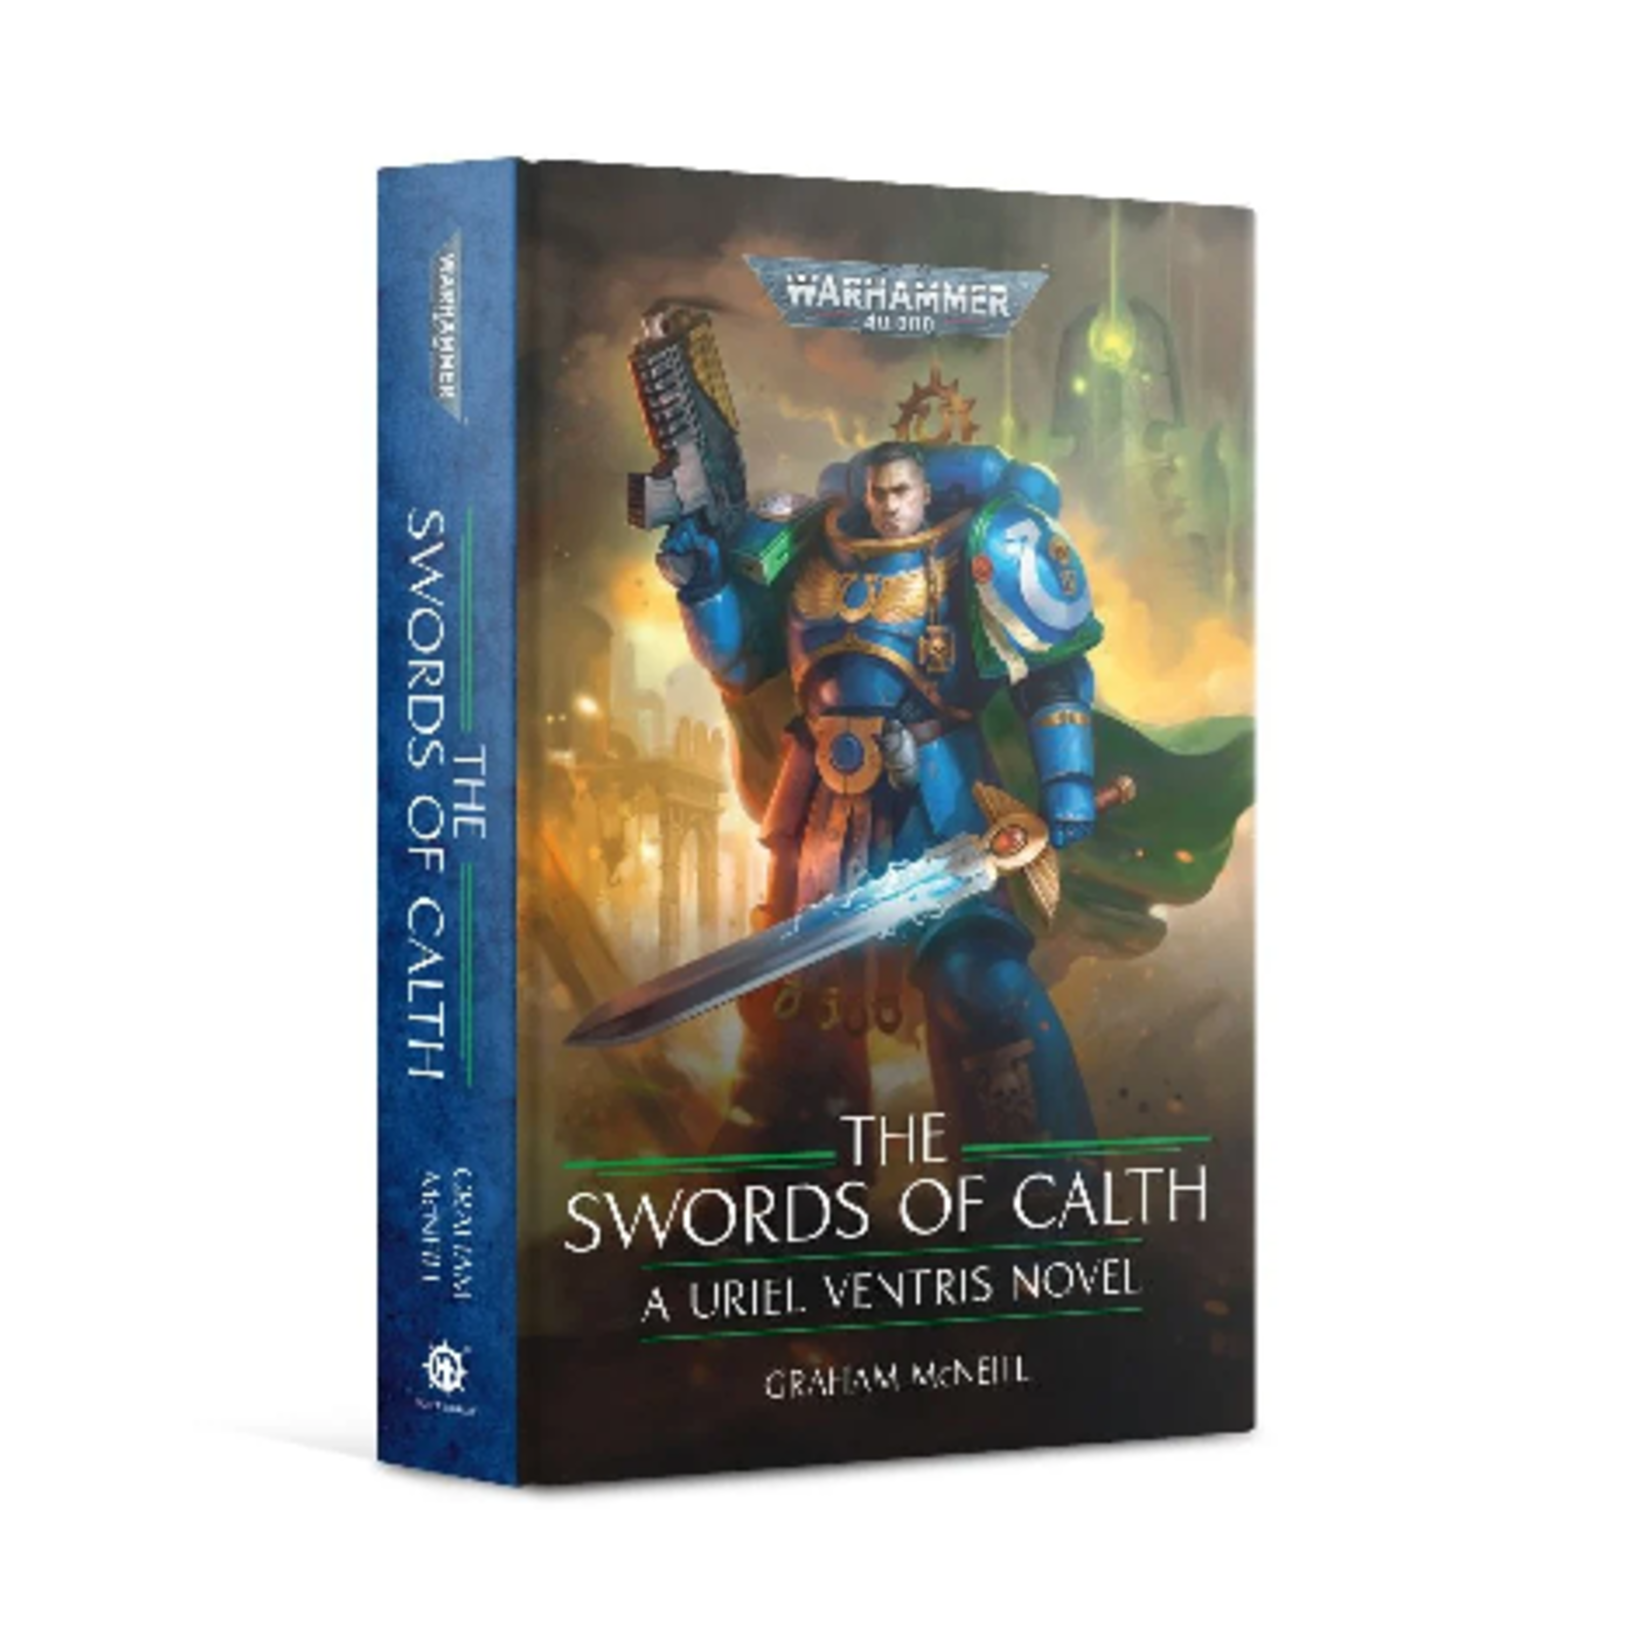 The Swords of Calth The Chronicles of Uriel Ventris, Book 7 (Hardback)